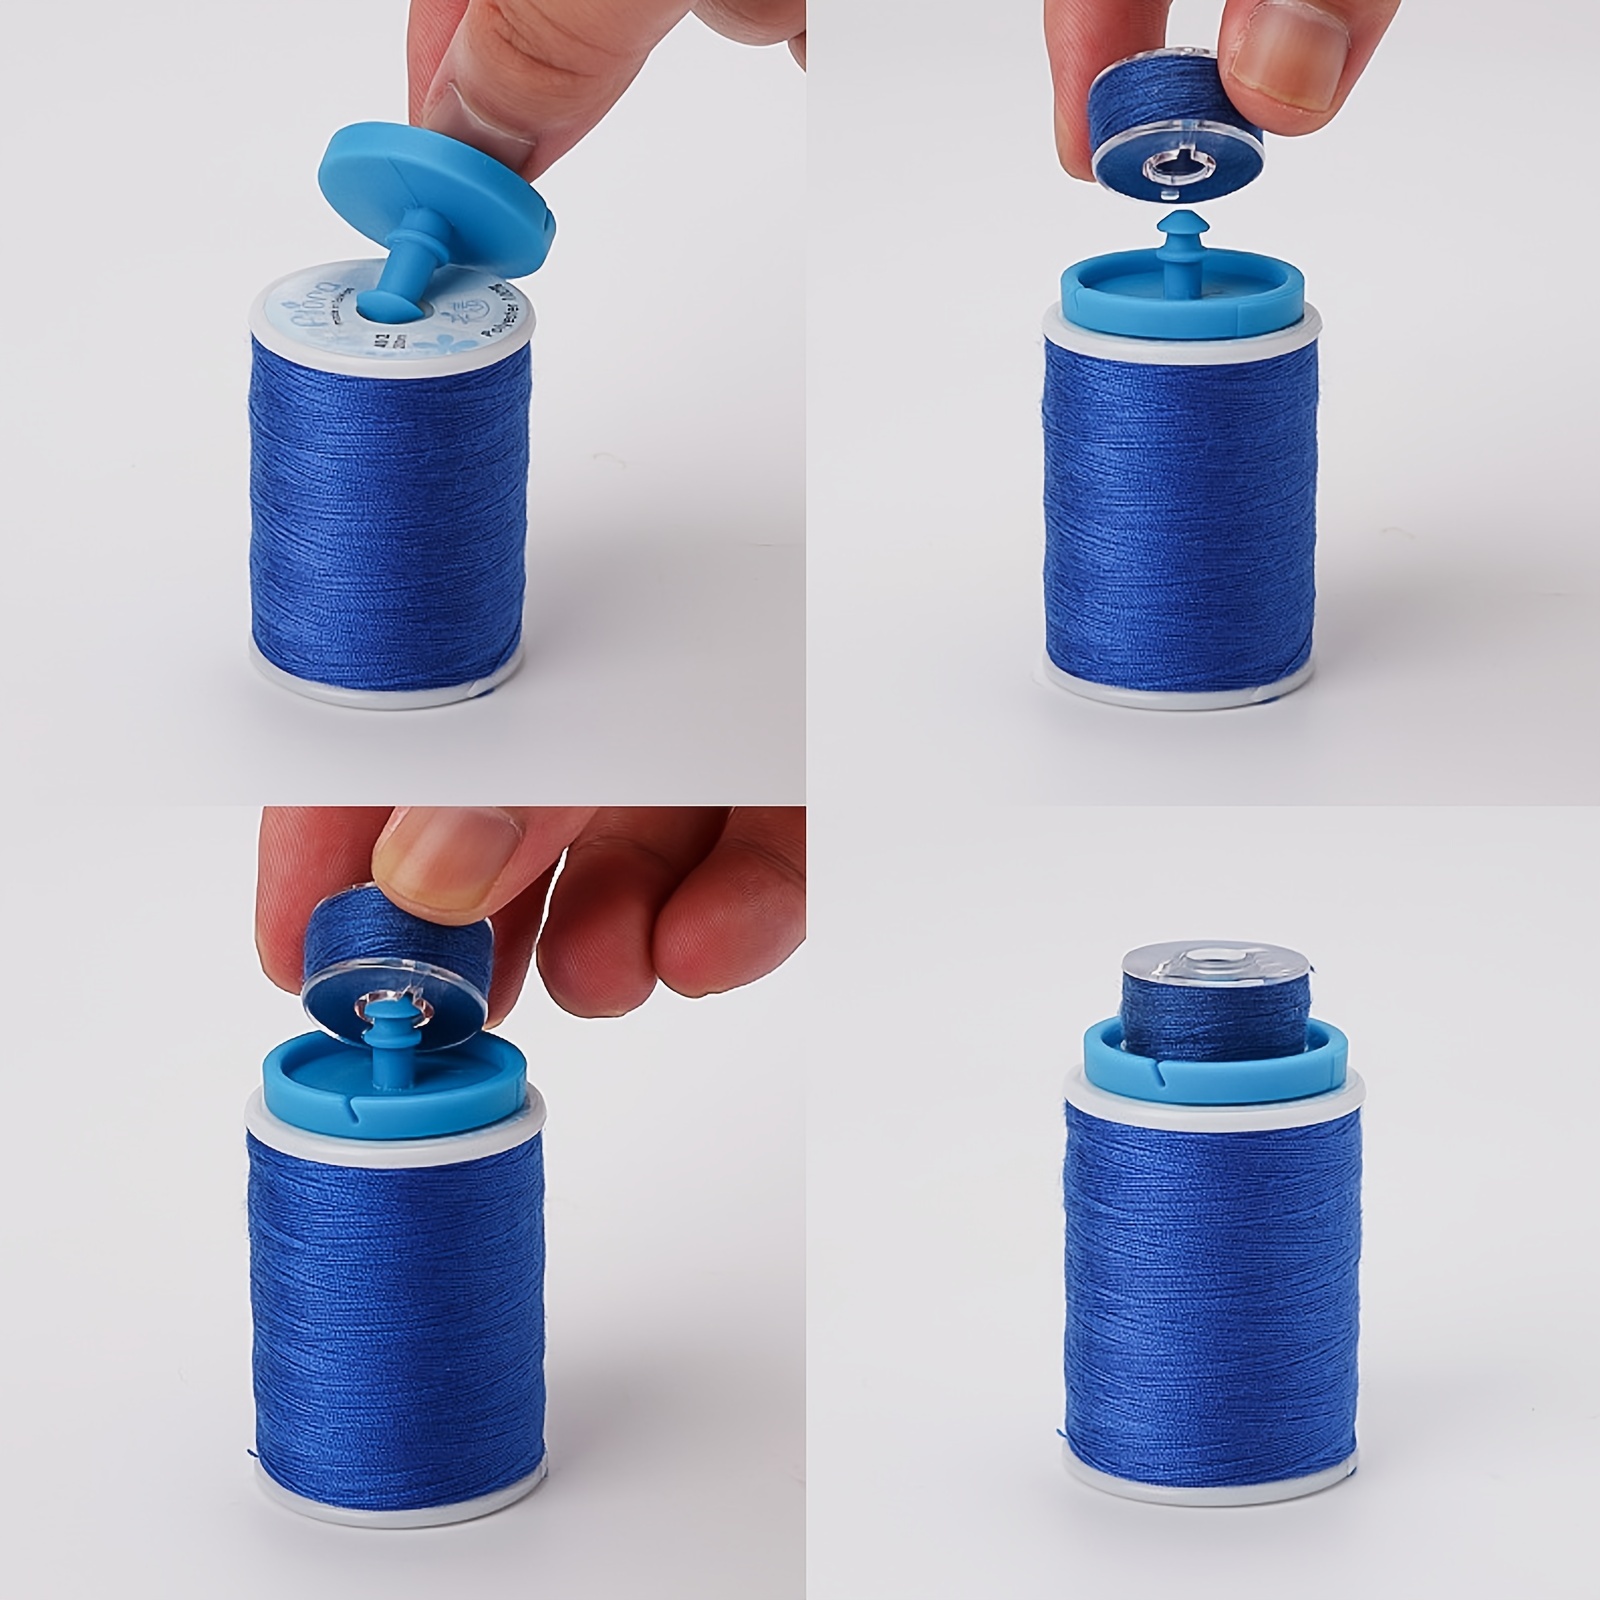 12pcs Threading Tool Sewing Machine Accessories Silicone Tool Bobbin Holders for Thread Spool Clip Yarn Spooler Silicone Thread Spool Huggers Sewing